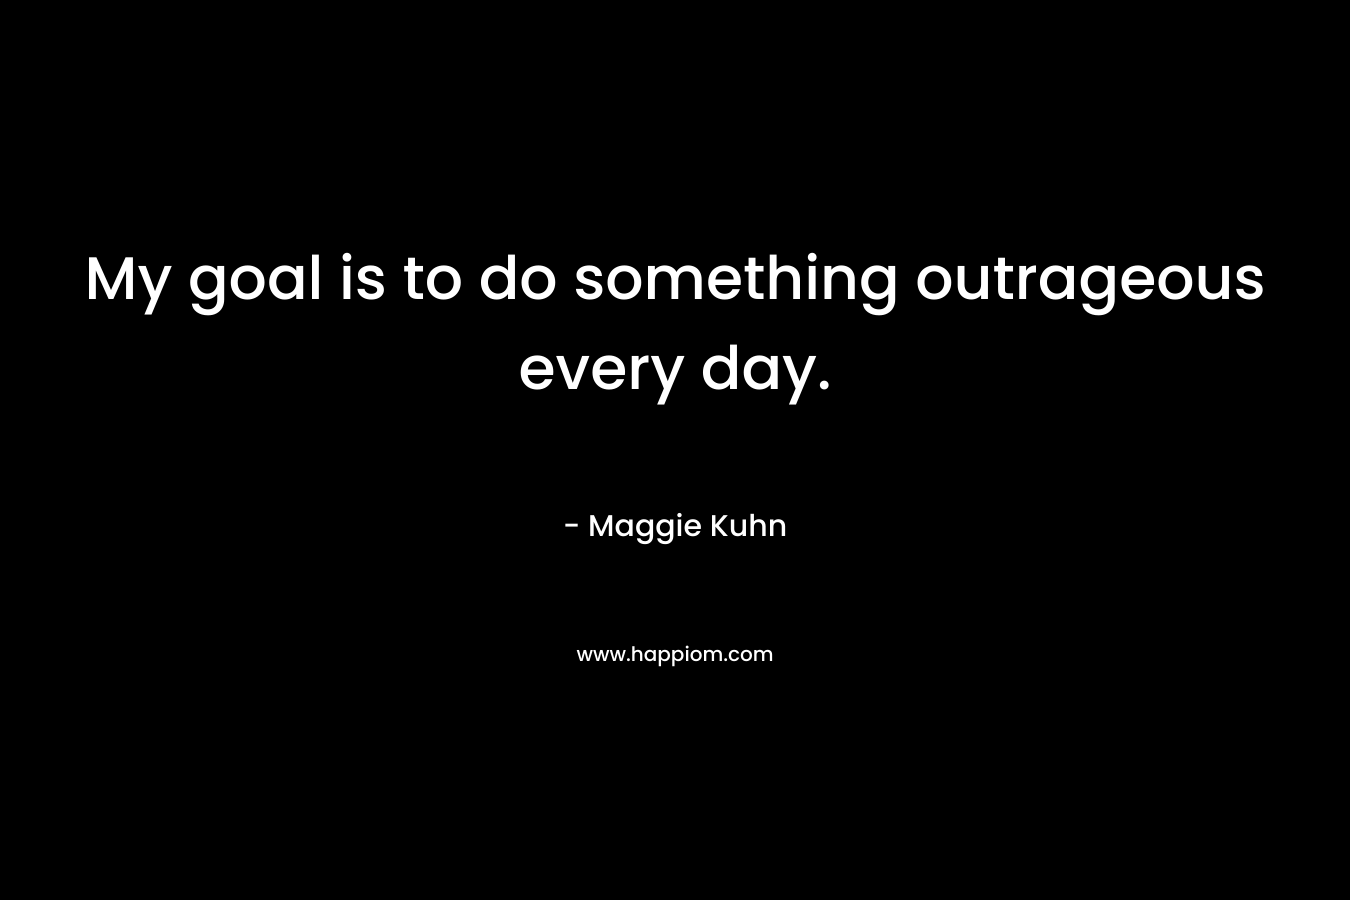 My goal is to do something outrageous every day.